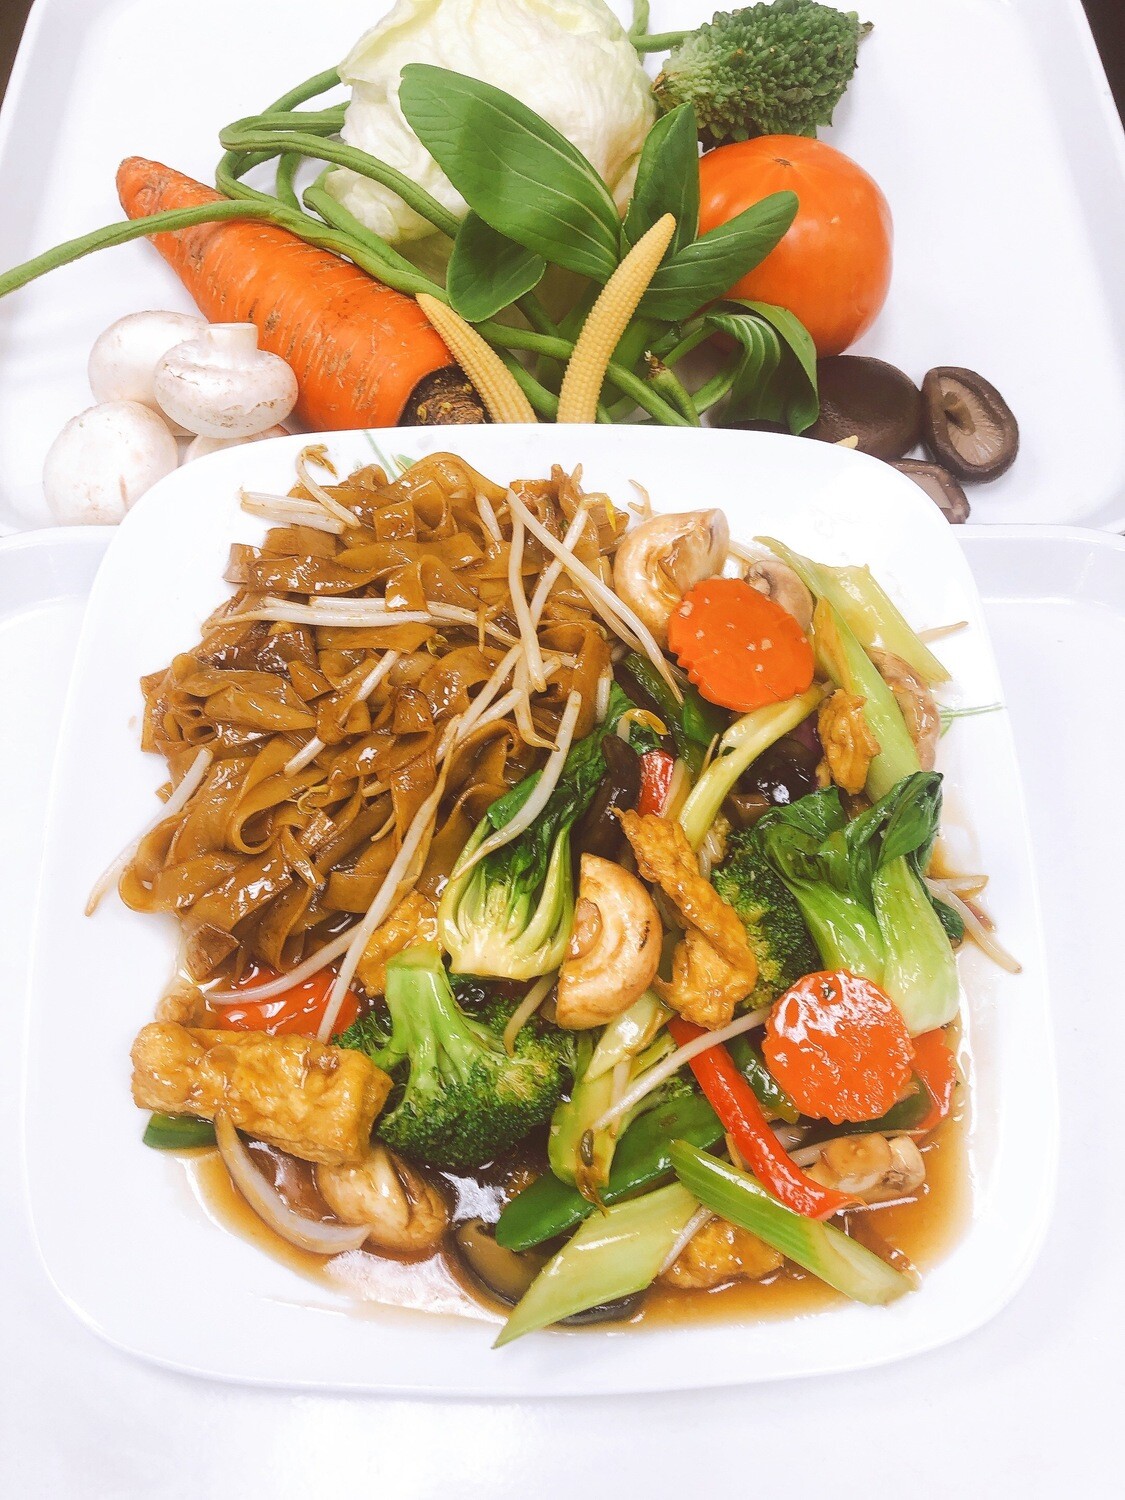 605- Stir Fried Vegetables, Mushrooms, and Tofu with Rice Noodles